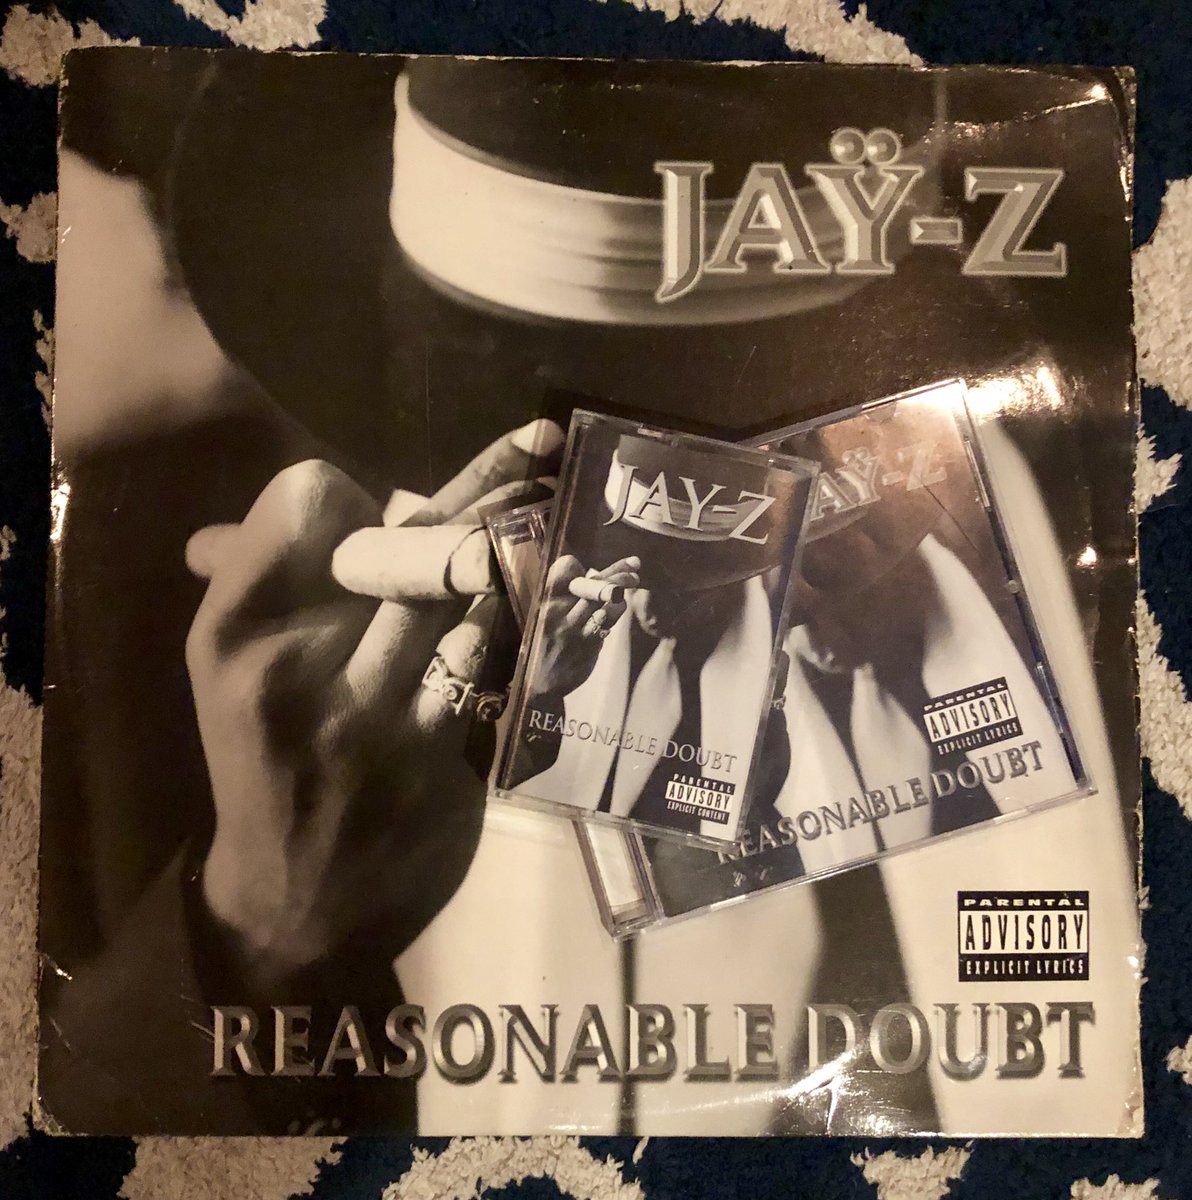 “Filled with vivid storytelling of street hustling, drug trafficking, and Brooklyn bravado in both its lyrics and skits, Hova's debut studio album brought kingpin tall tales to popular culture without sacrificing any authenticity in its portrait of the criminal underworld.”